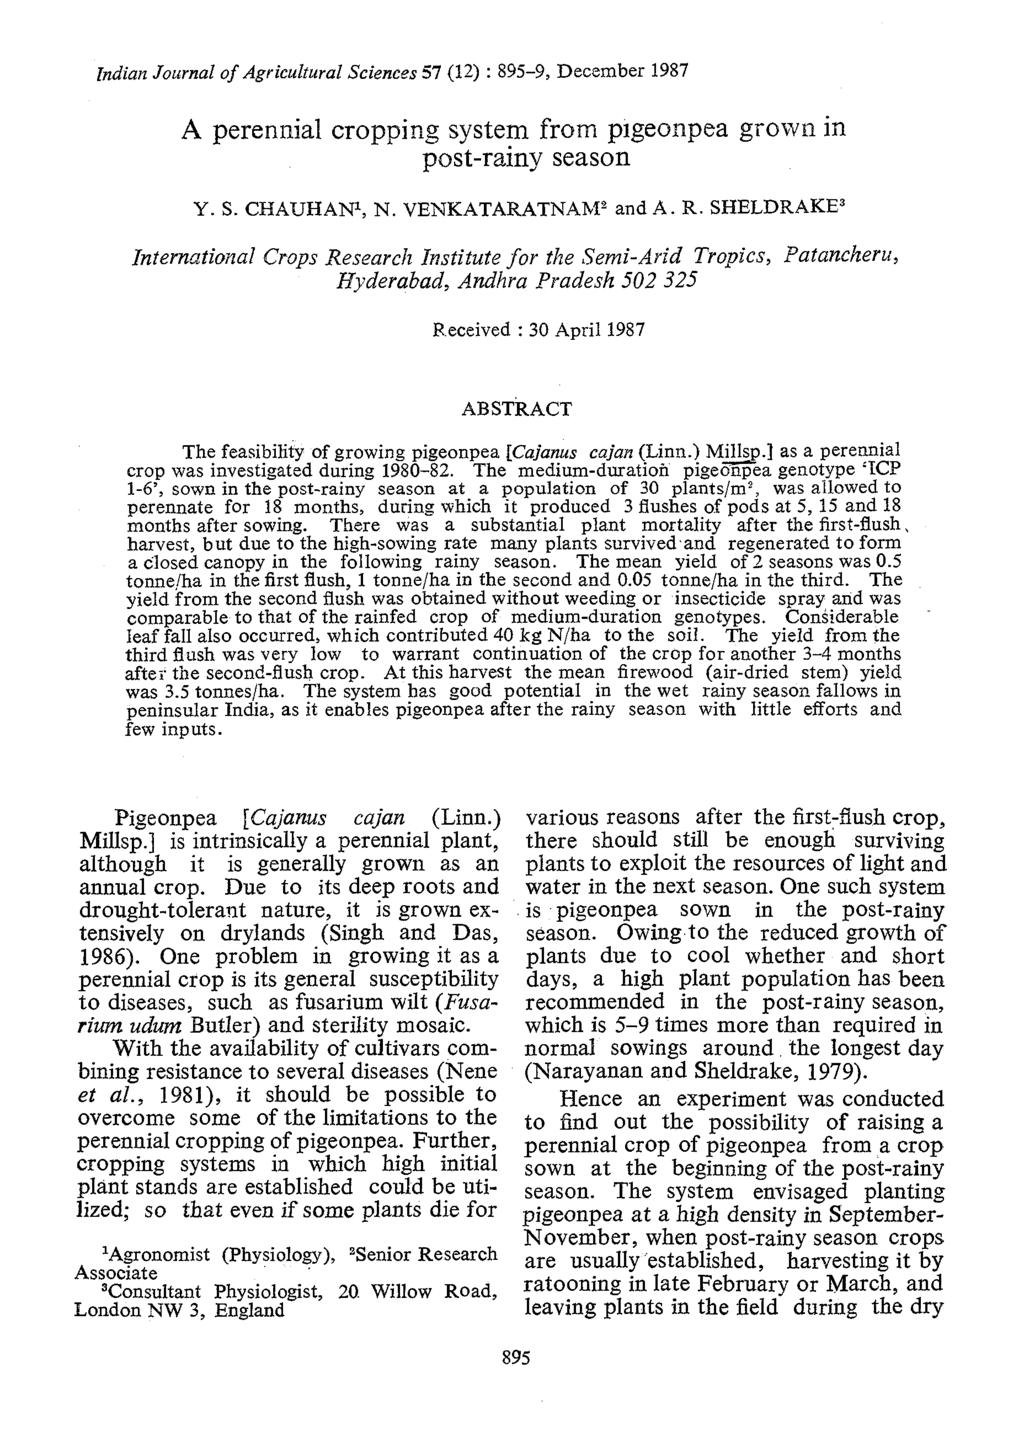 Indian Journal of Agricultural Sciences 57 (12) : 895-9, December 1987 A perennial cropping system from pigeonpea grown in post-rainy season Y. S. CHAUHAN1, N. VENKATARATNAM2 and A. R.